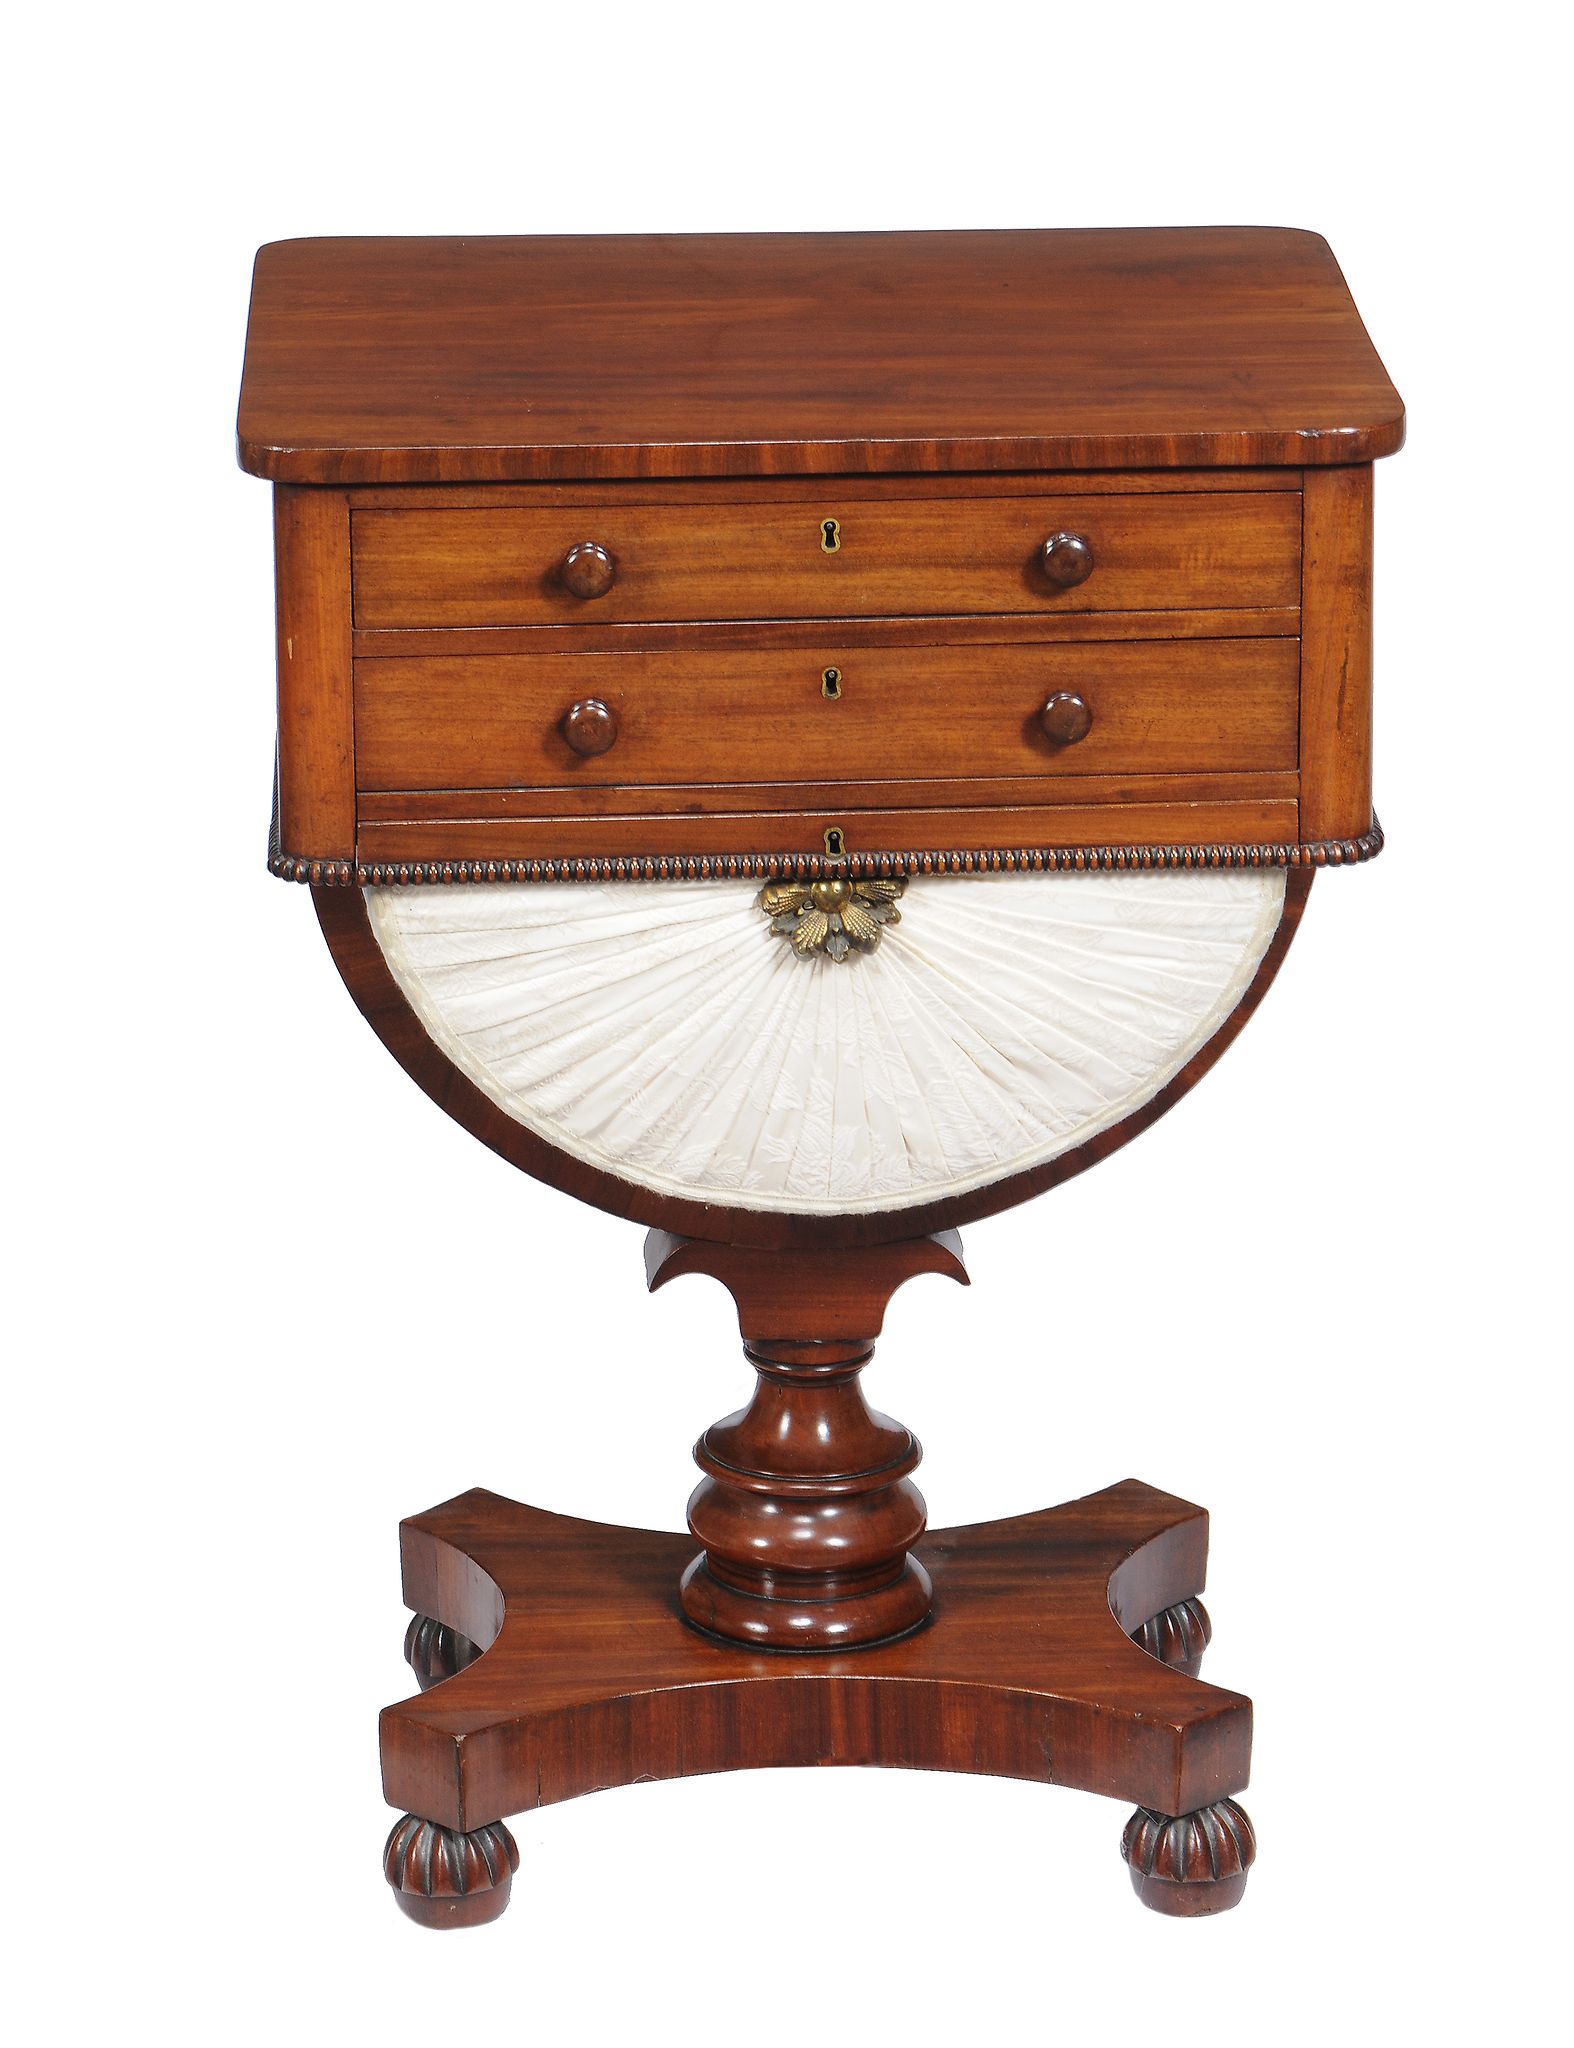 A William IV mahogany work table, circa 1835, the top drawer with a divided interior, 69cm high, - Image 2 of 3